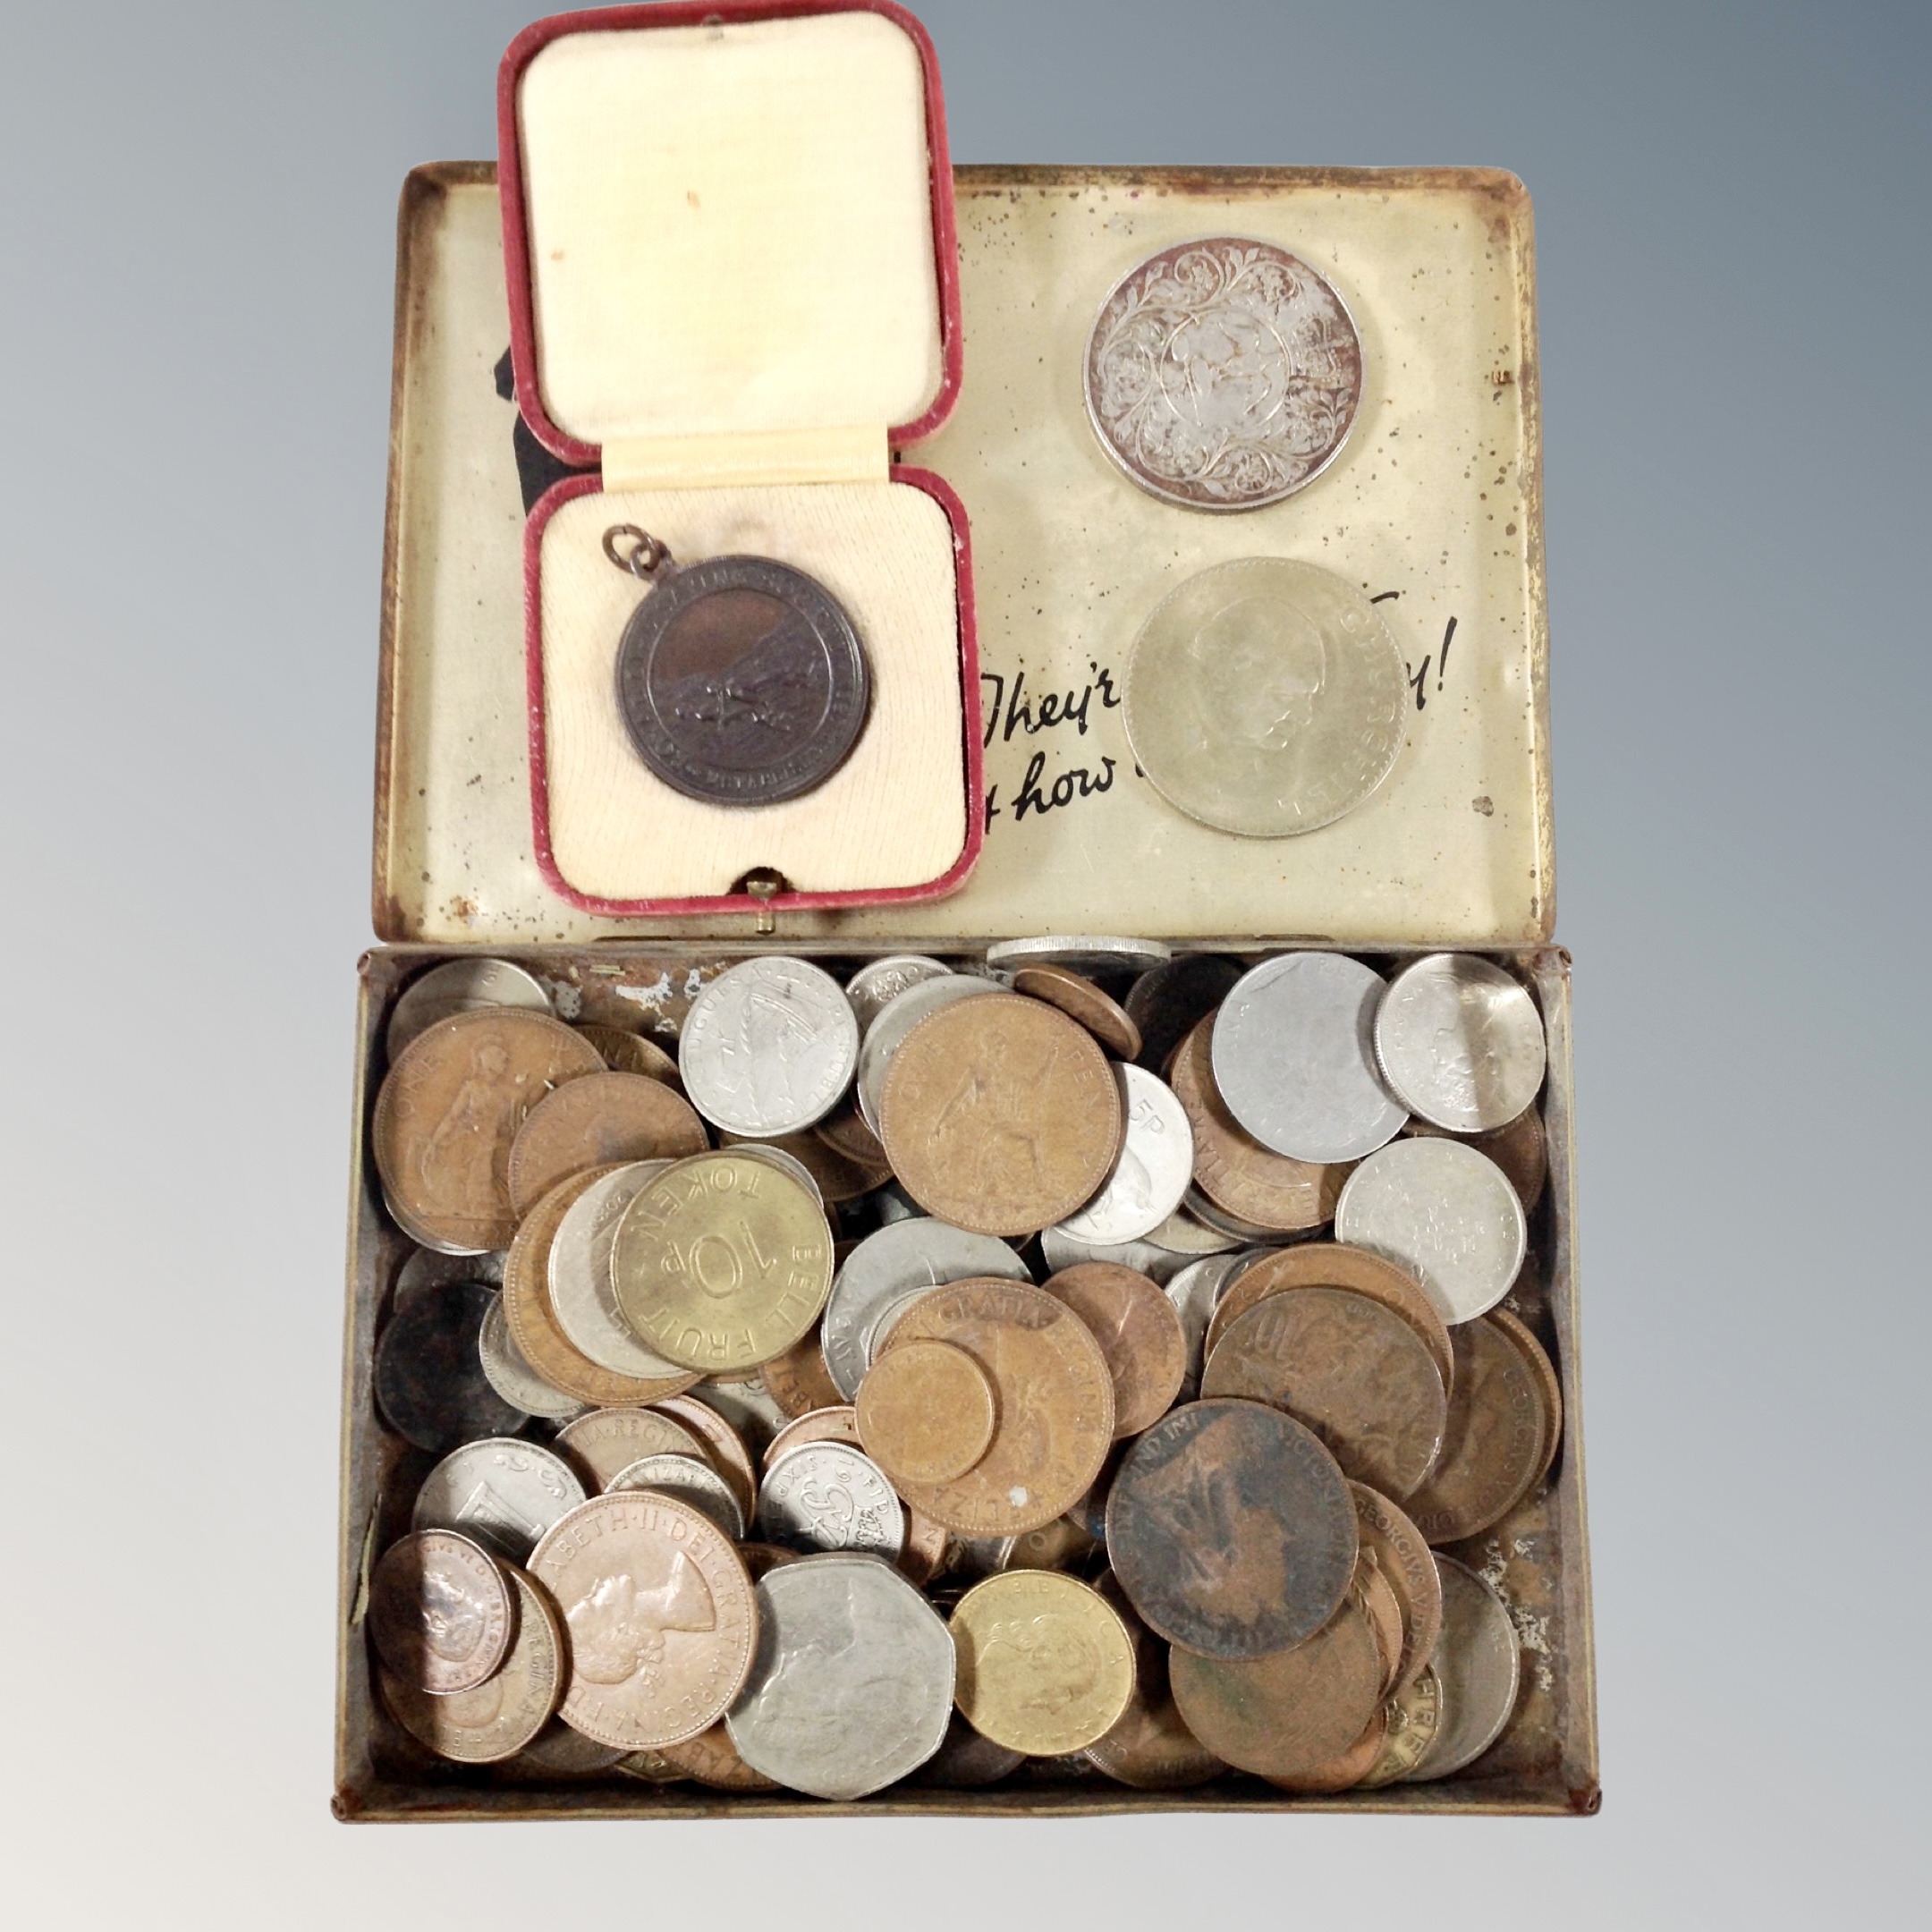 A Royal life Saving medal in case together with a tin containing 19th and 20th century British and